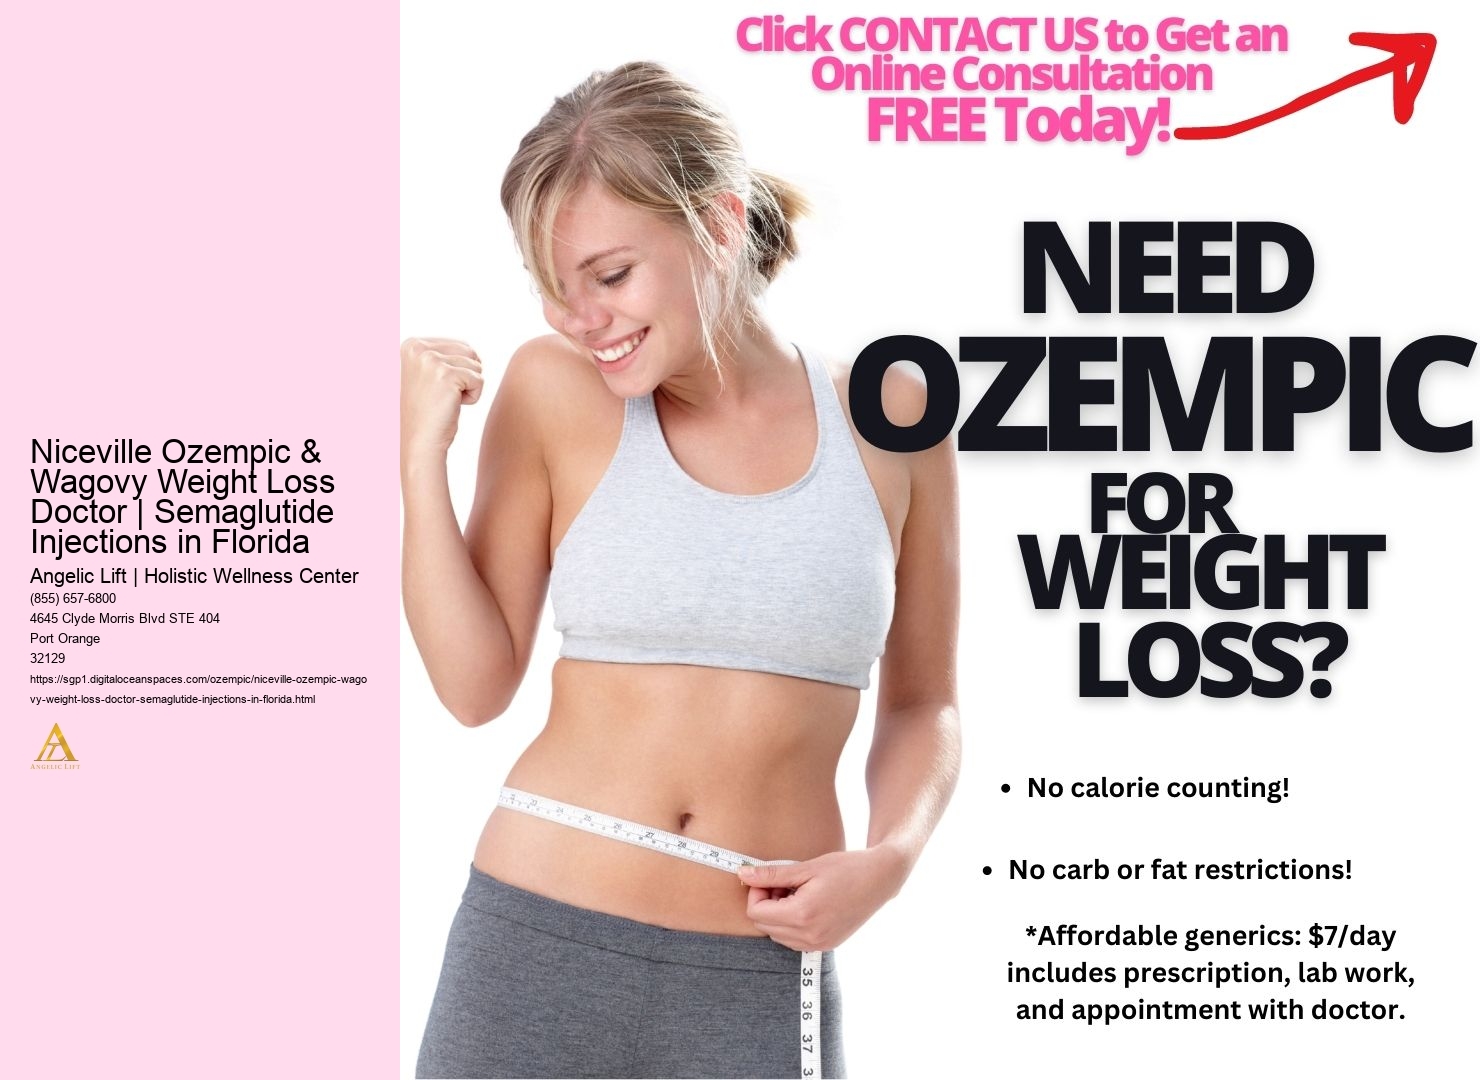 Niceville Ozempic & Wagovy Weight Loss Doctor | Semaglutide Injections in Florida